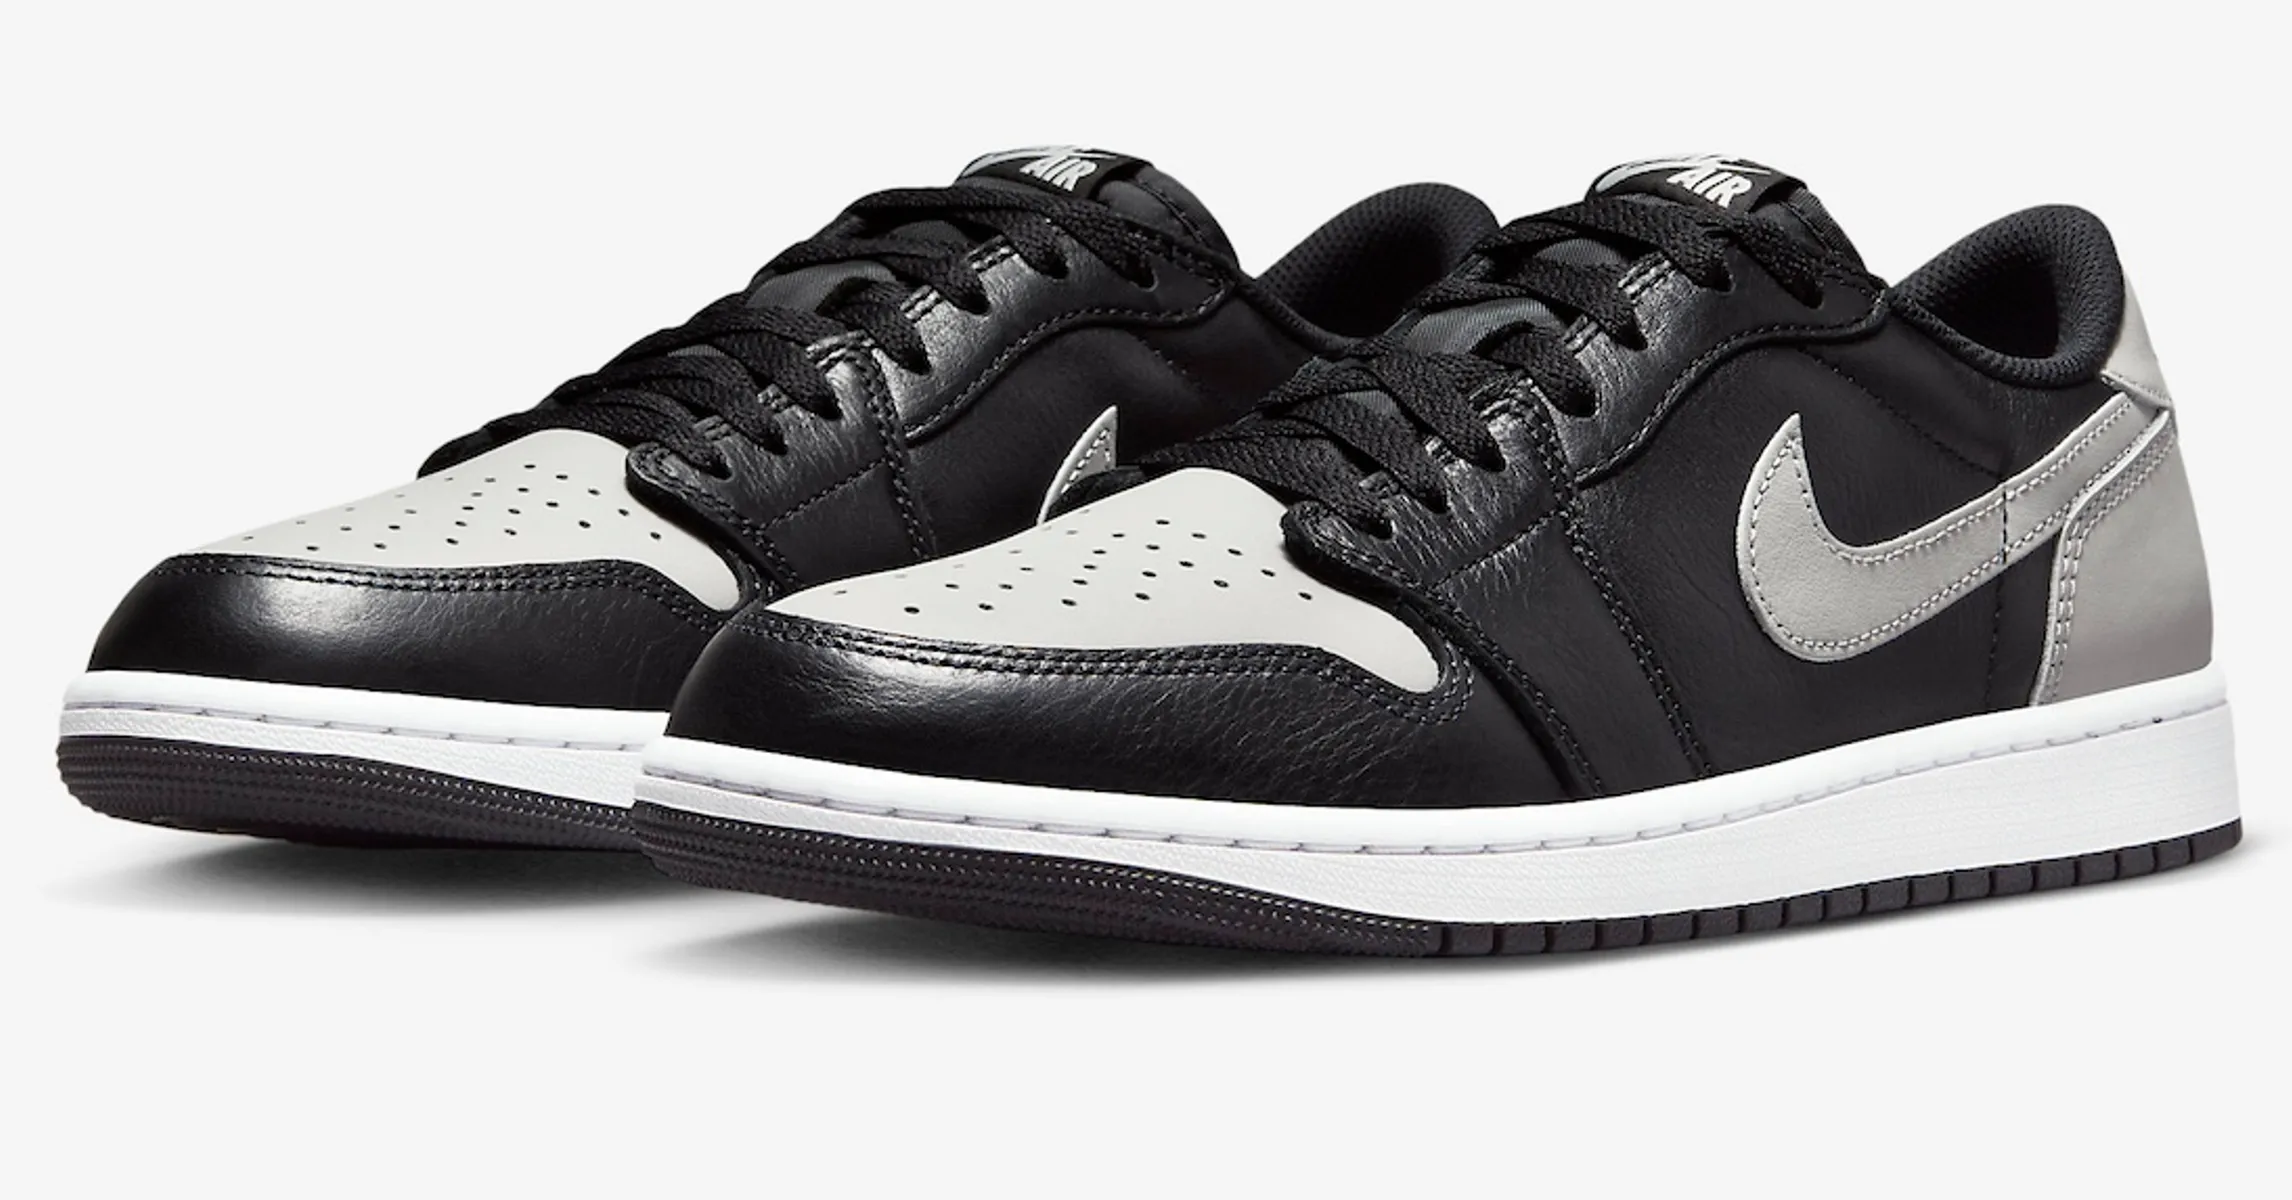 Air Jordan 1 Low OG “Shadow” Dropping Earlier Than Expected